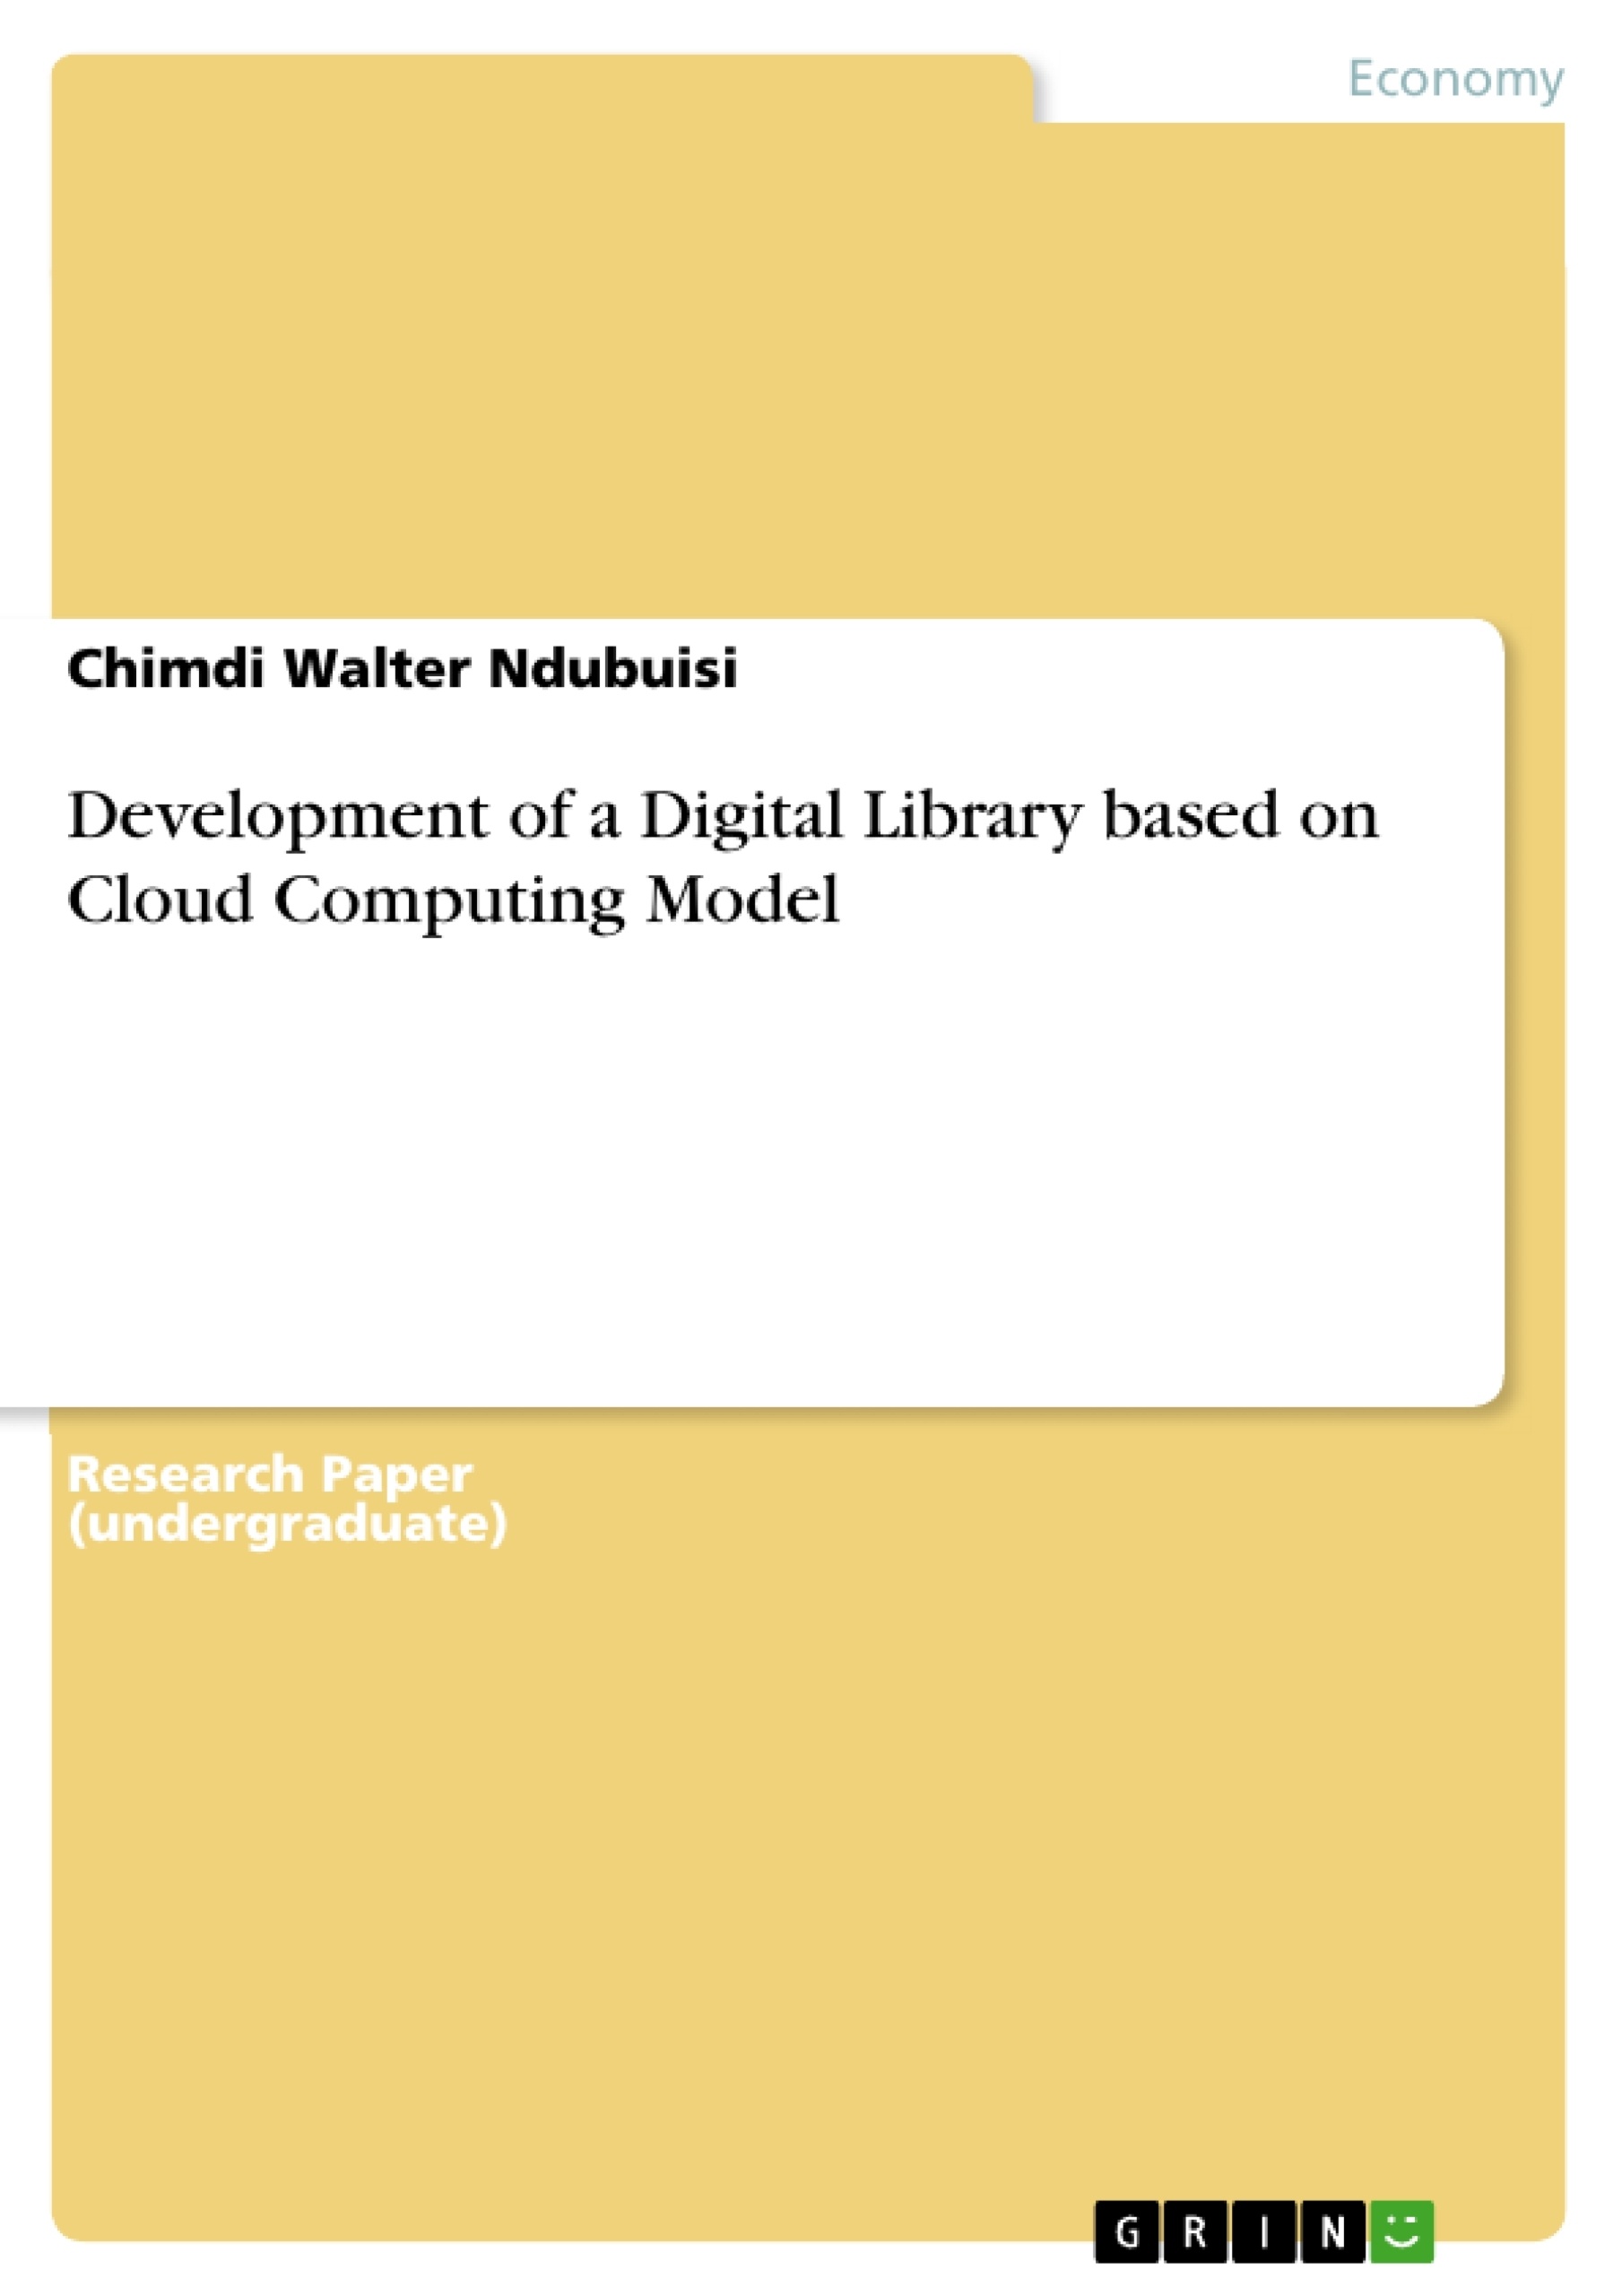 Título: Development of a Digital Library based on Cloud Computing Model